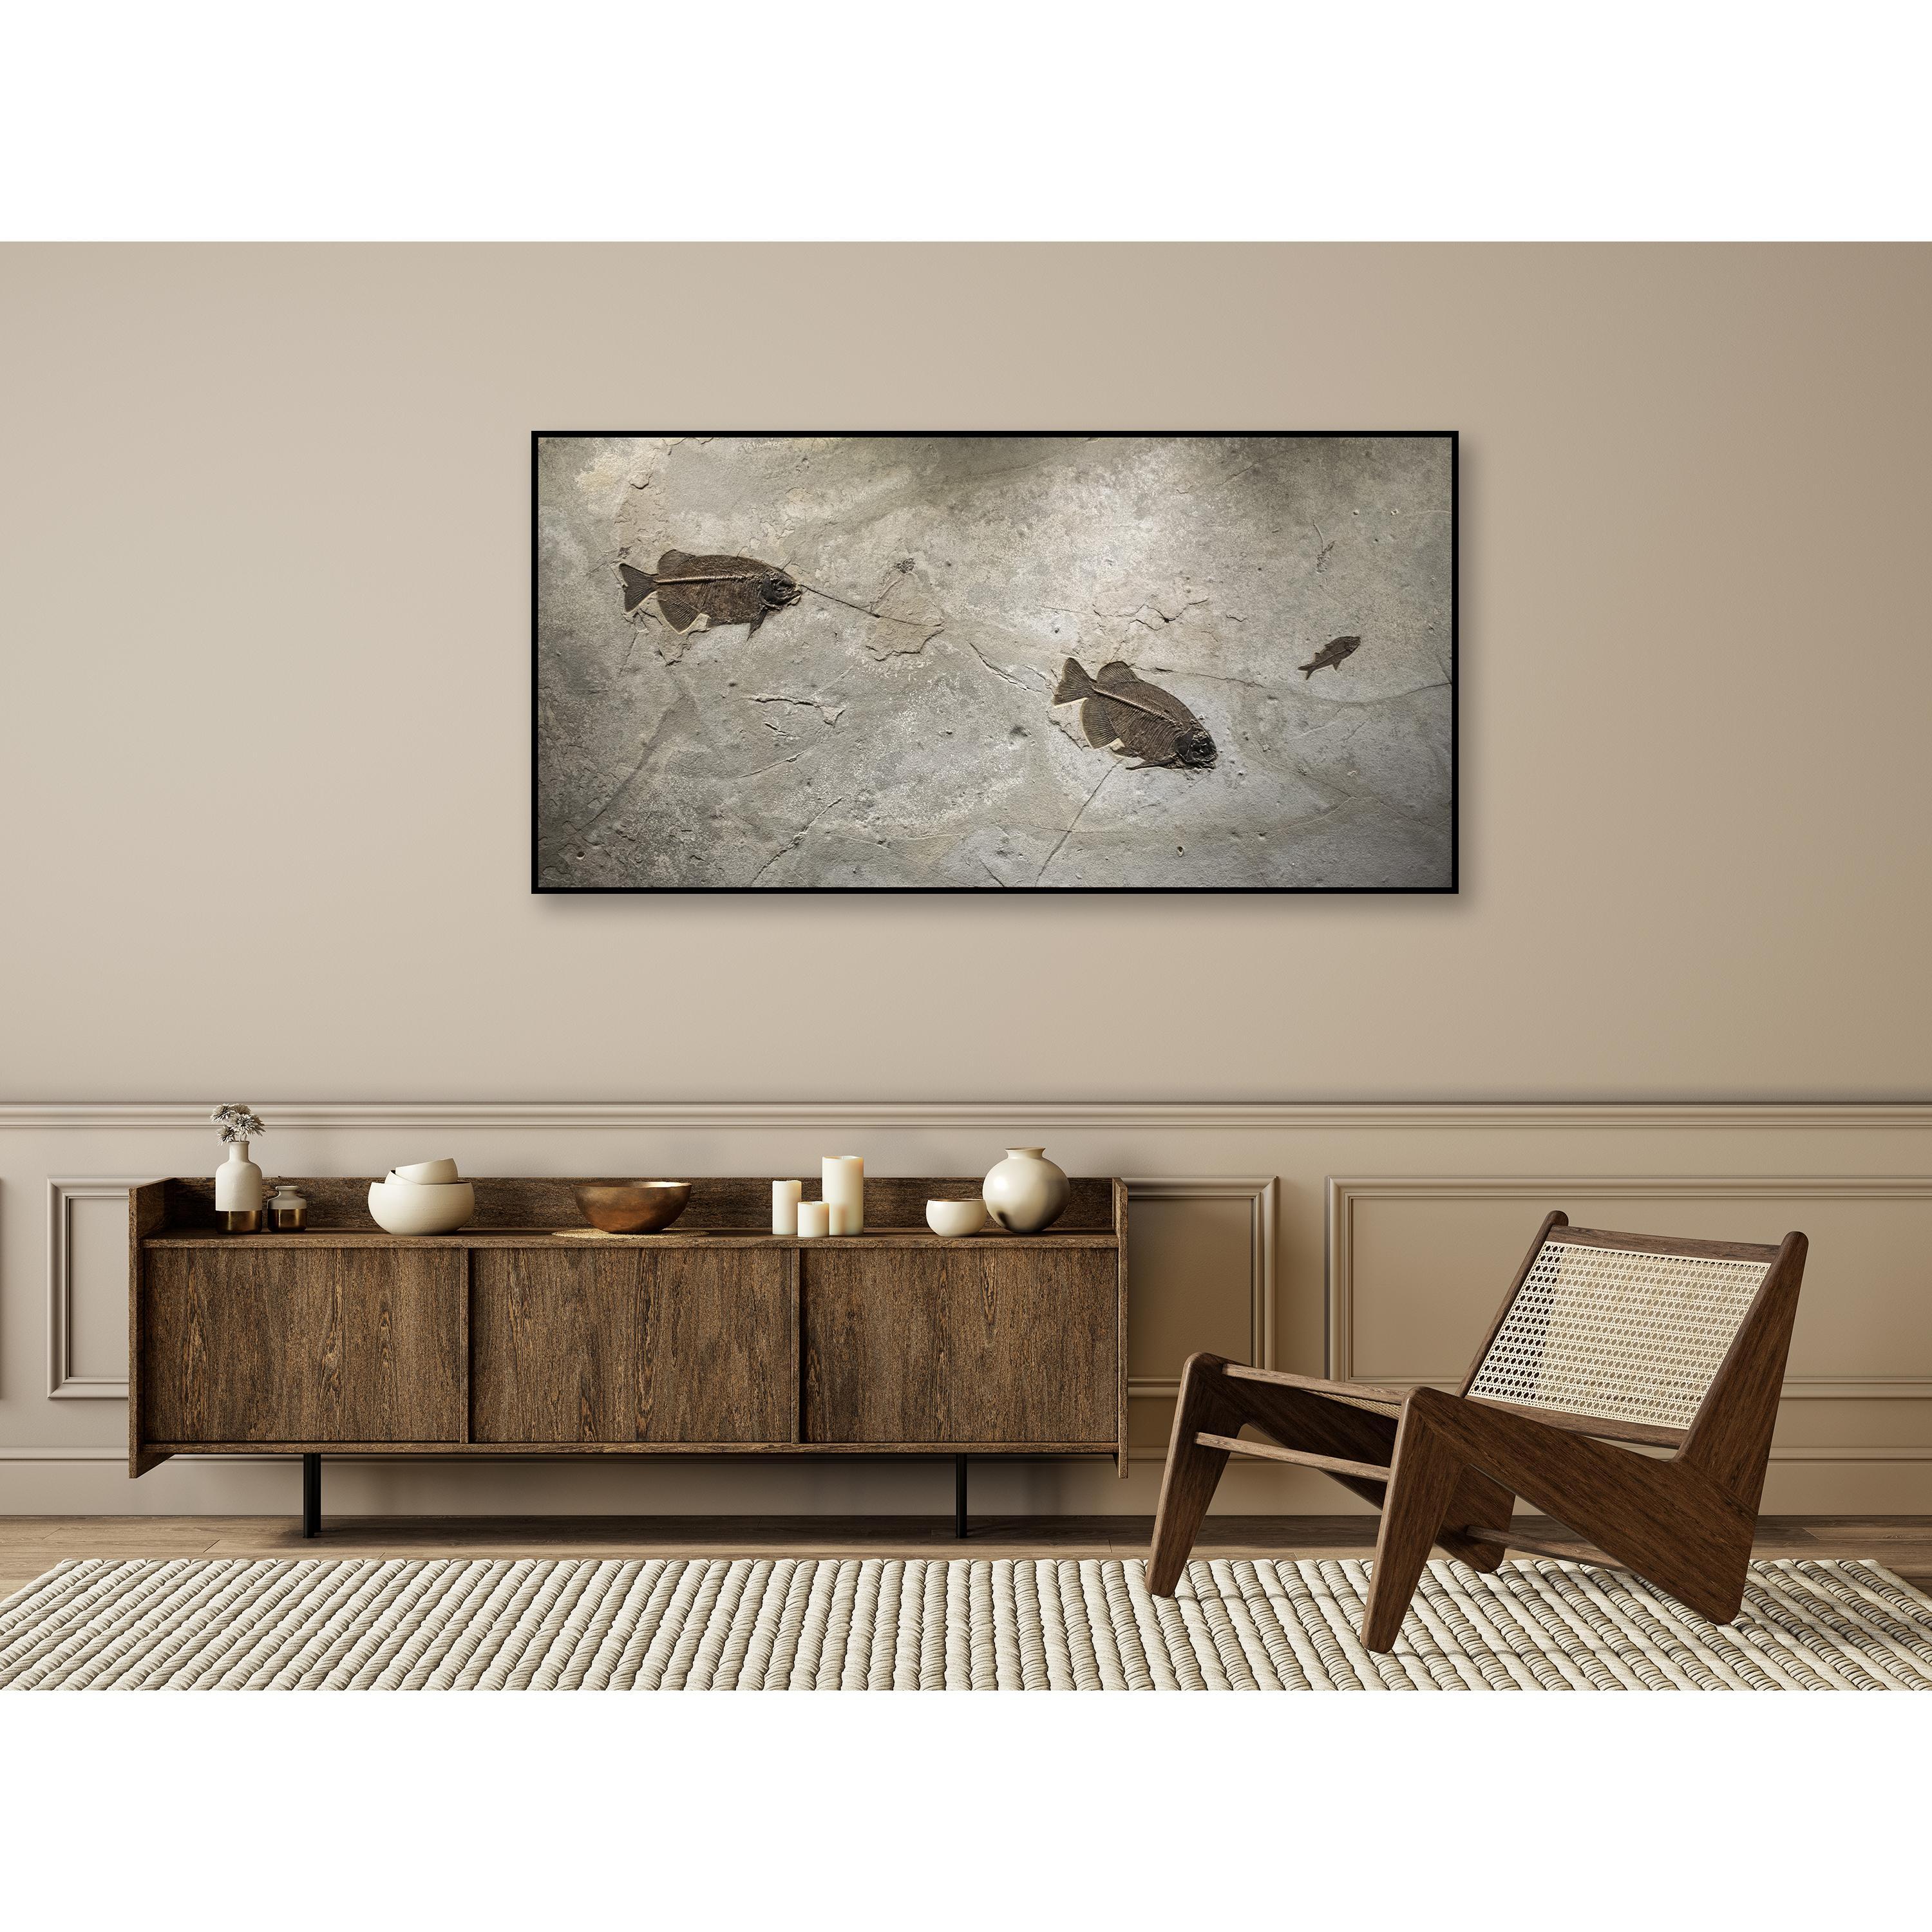 This dramatic, all-natural fossil mural features an elegant array of Eocene era fossil fish, all dating around 50 million years old. Two Phareodus testis and a single Knightia eocaena are forever preserved in this natural fossil-bearing limestone.